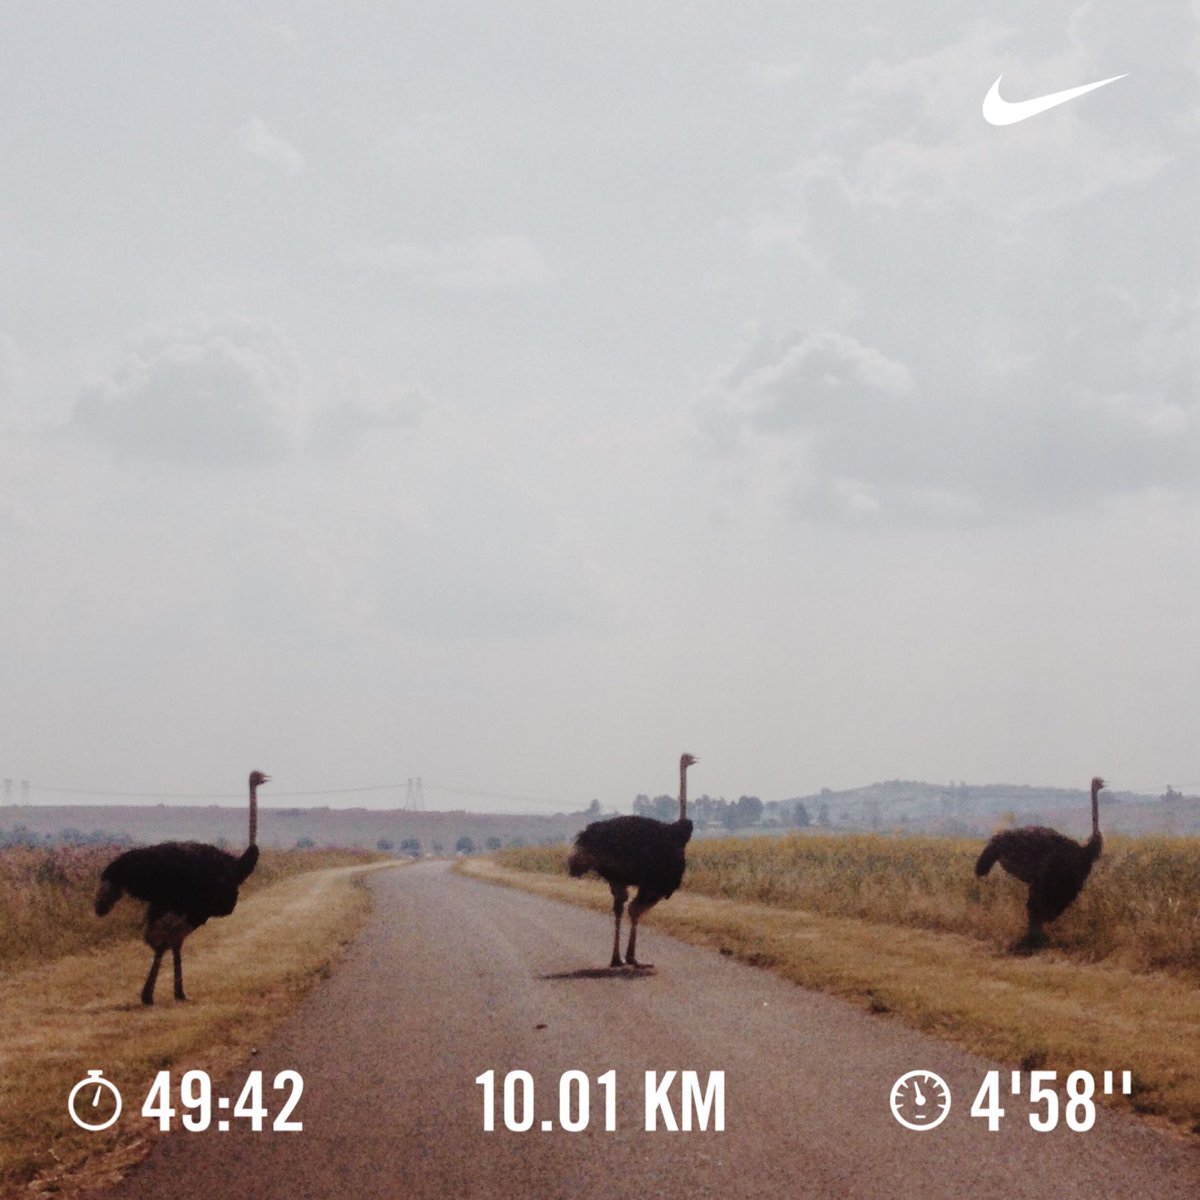 10km at 4’58” pace today. Nothing can stop me, I’m all the way up 🏃🏾‍♂️🔥

#nikerunclub #teamfitness